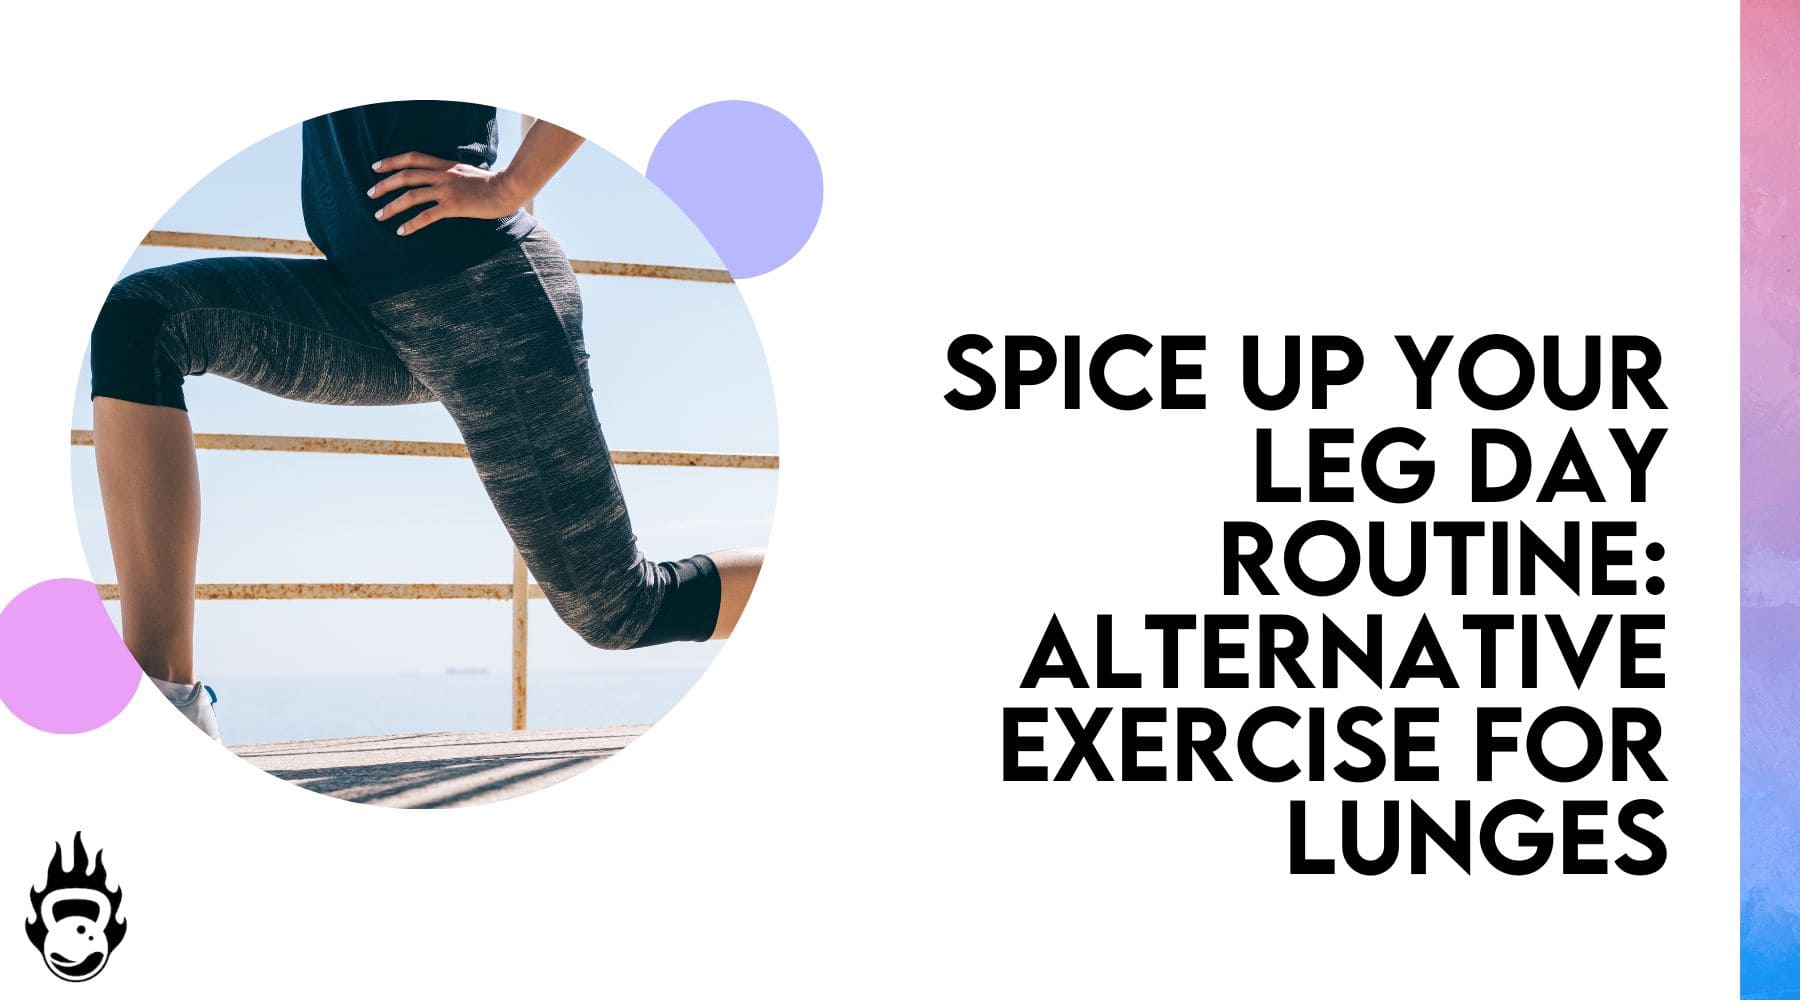 Spice Up Your Leg Day Routine: Alternative Exercise for Lunges